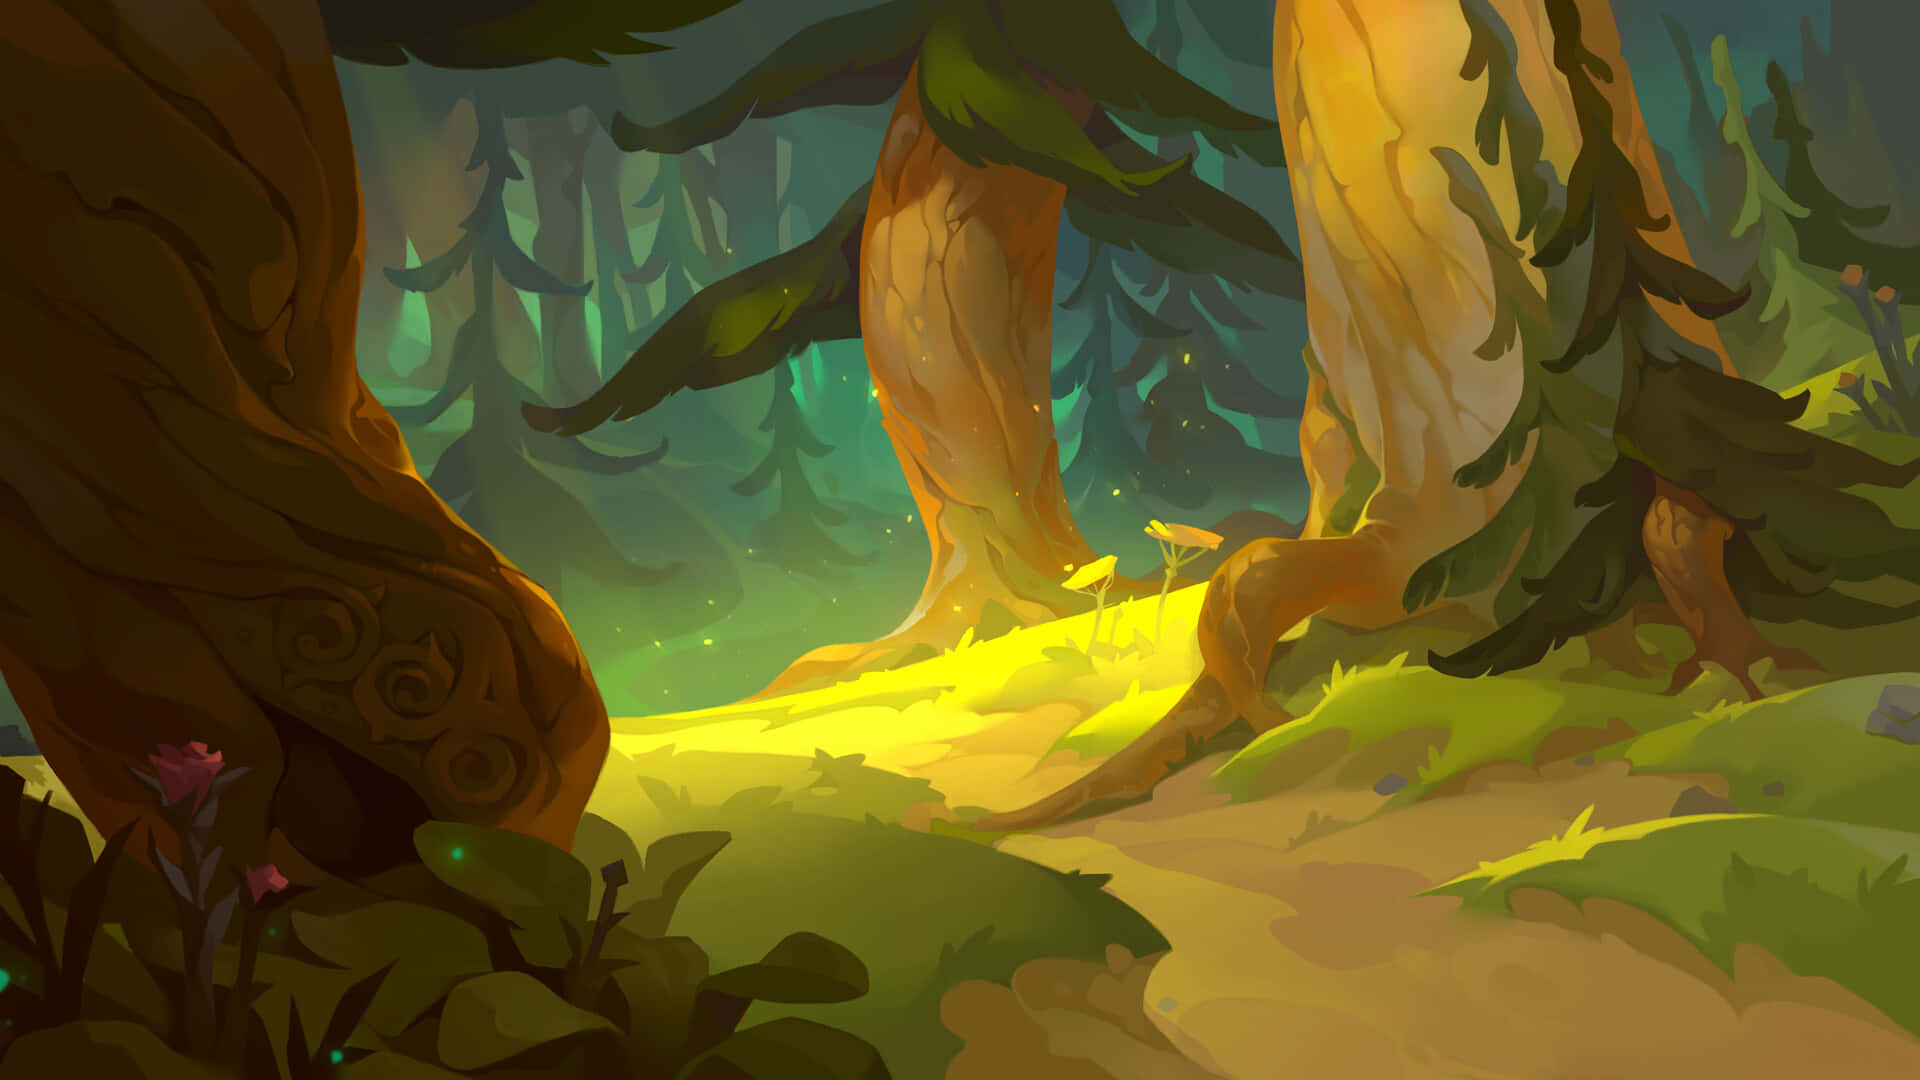 Explore the magical landscape of Cartoon Forest